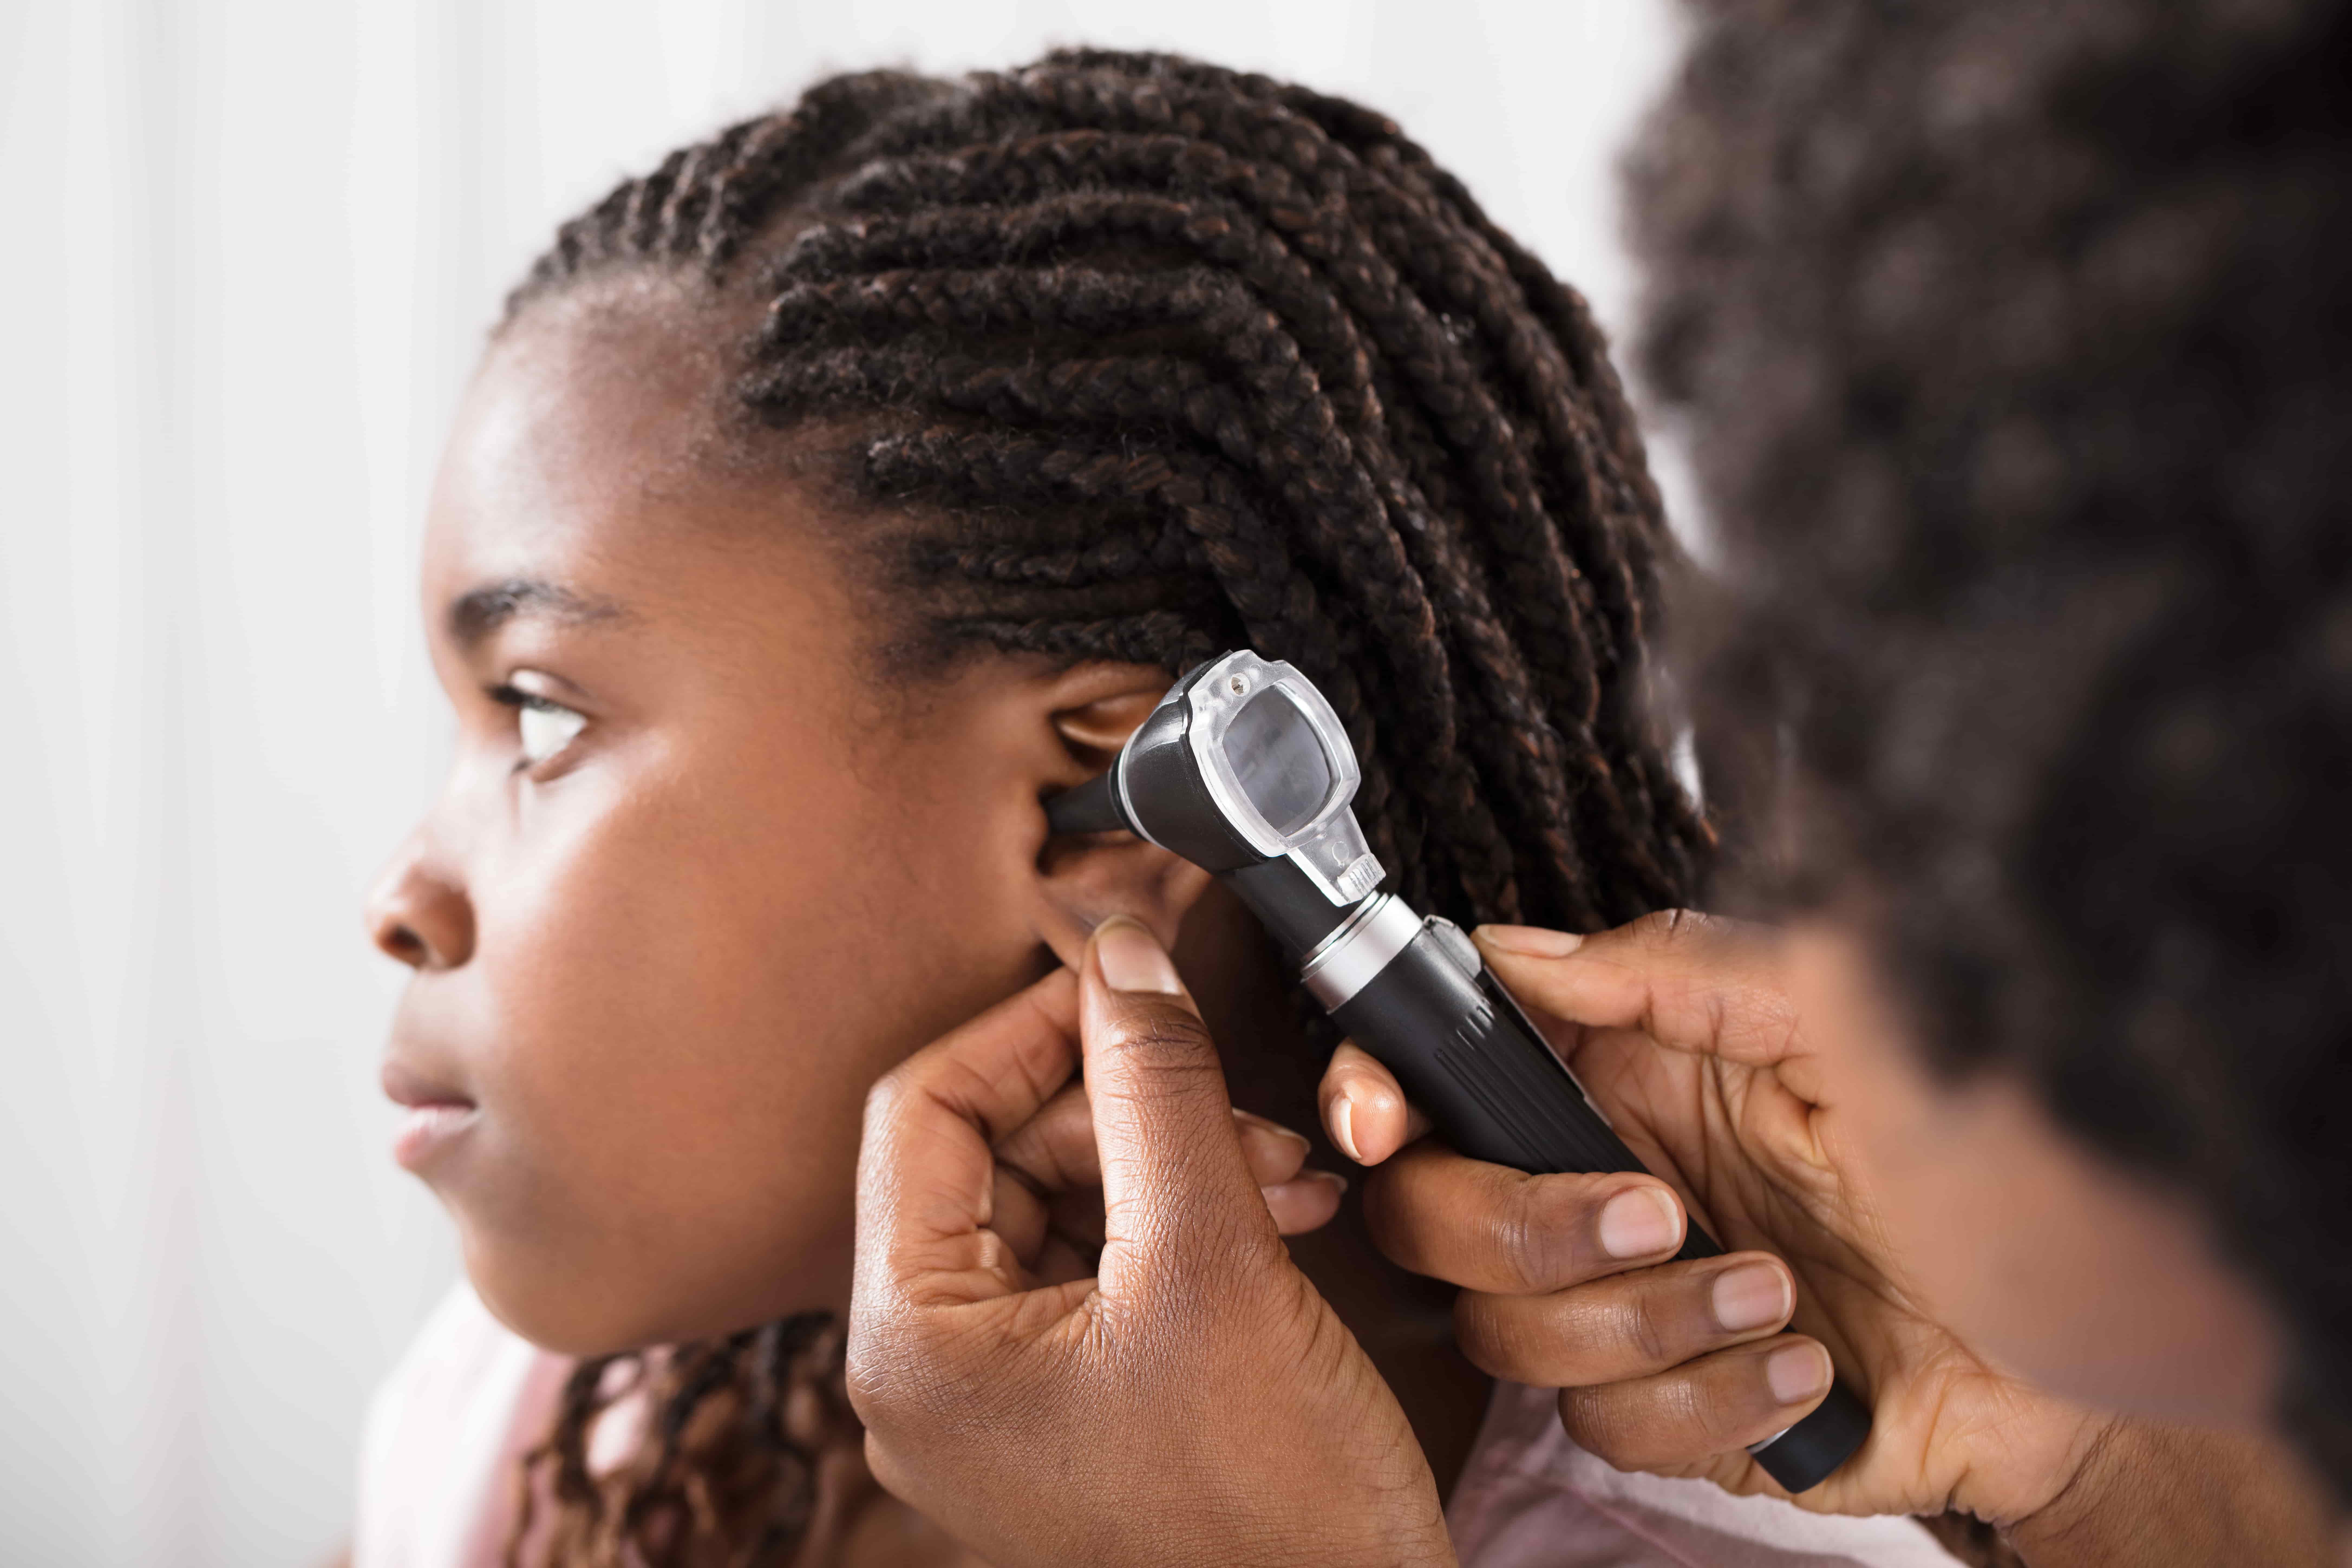 A doctor examines a young girl’s ear using an otoscope in a medical office.